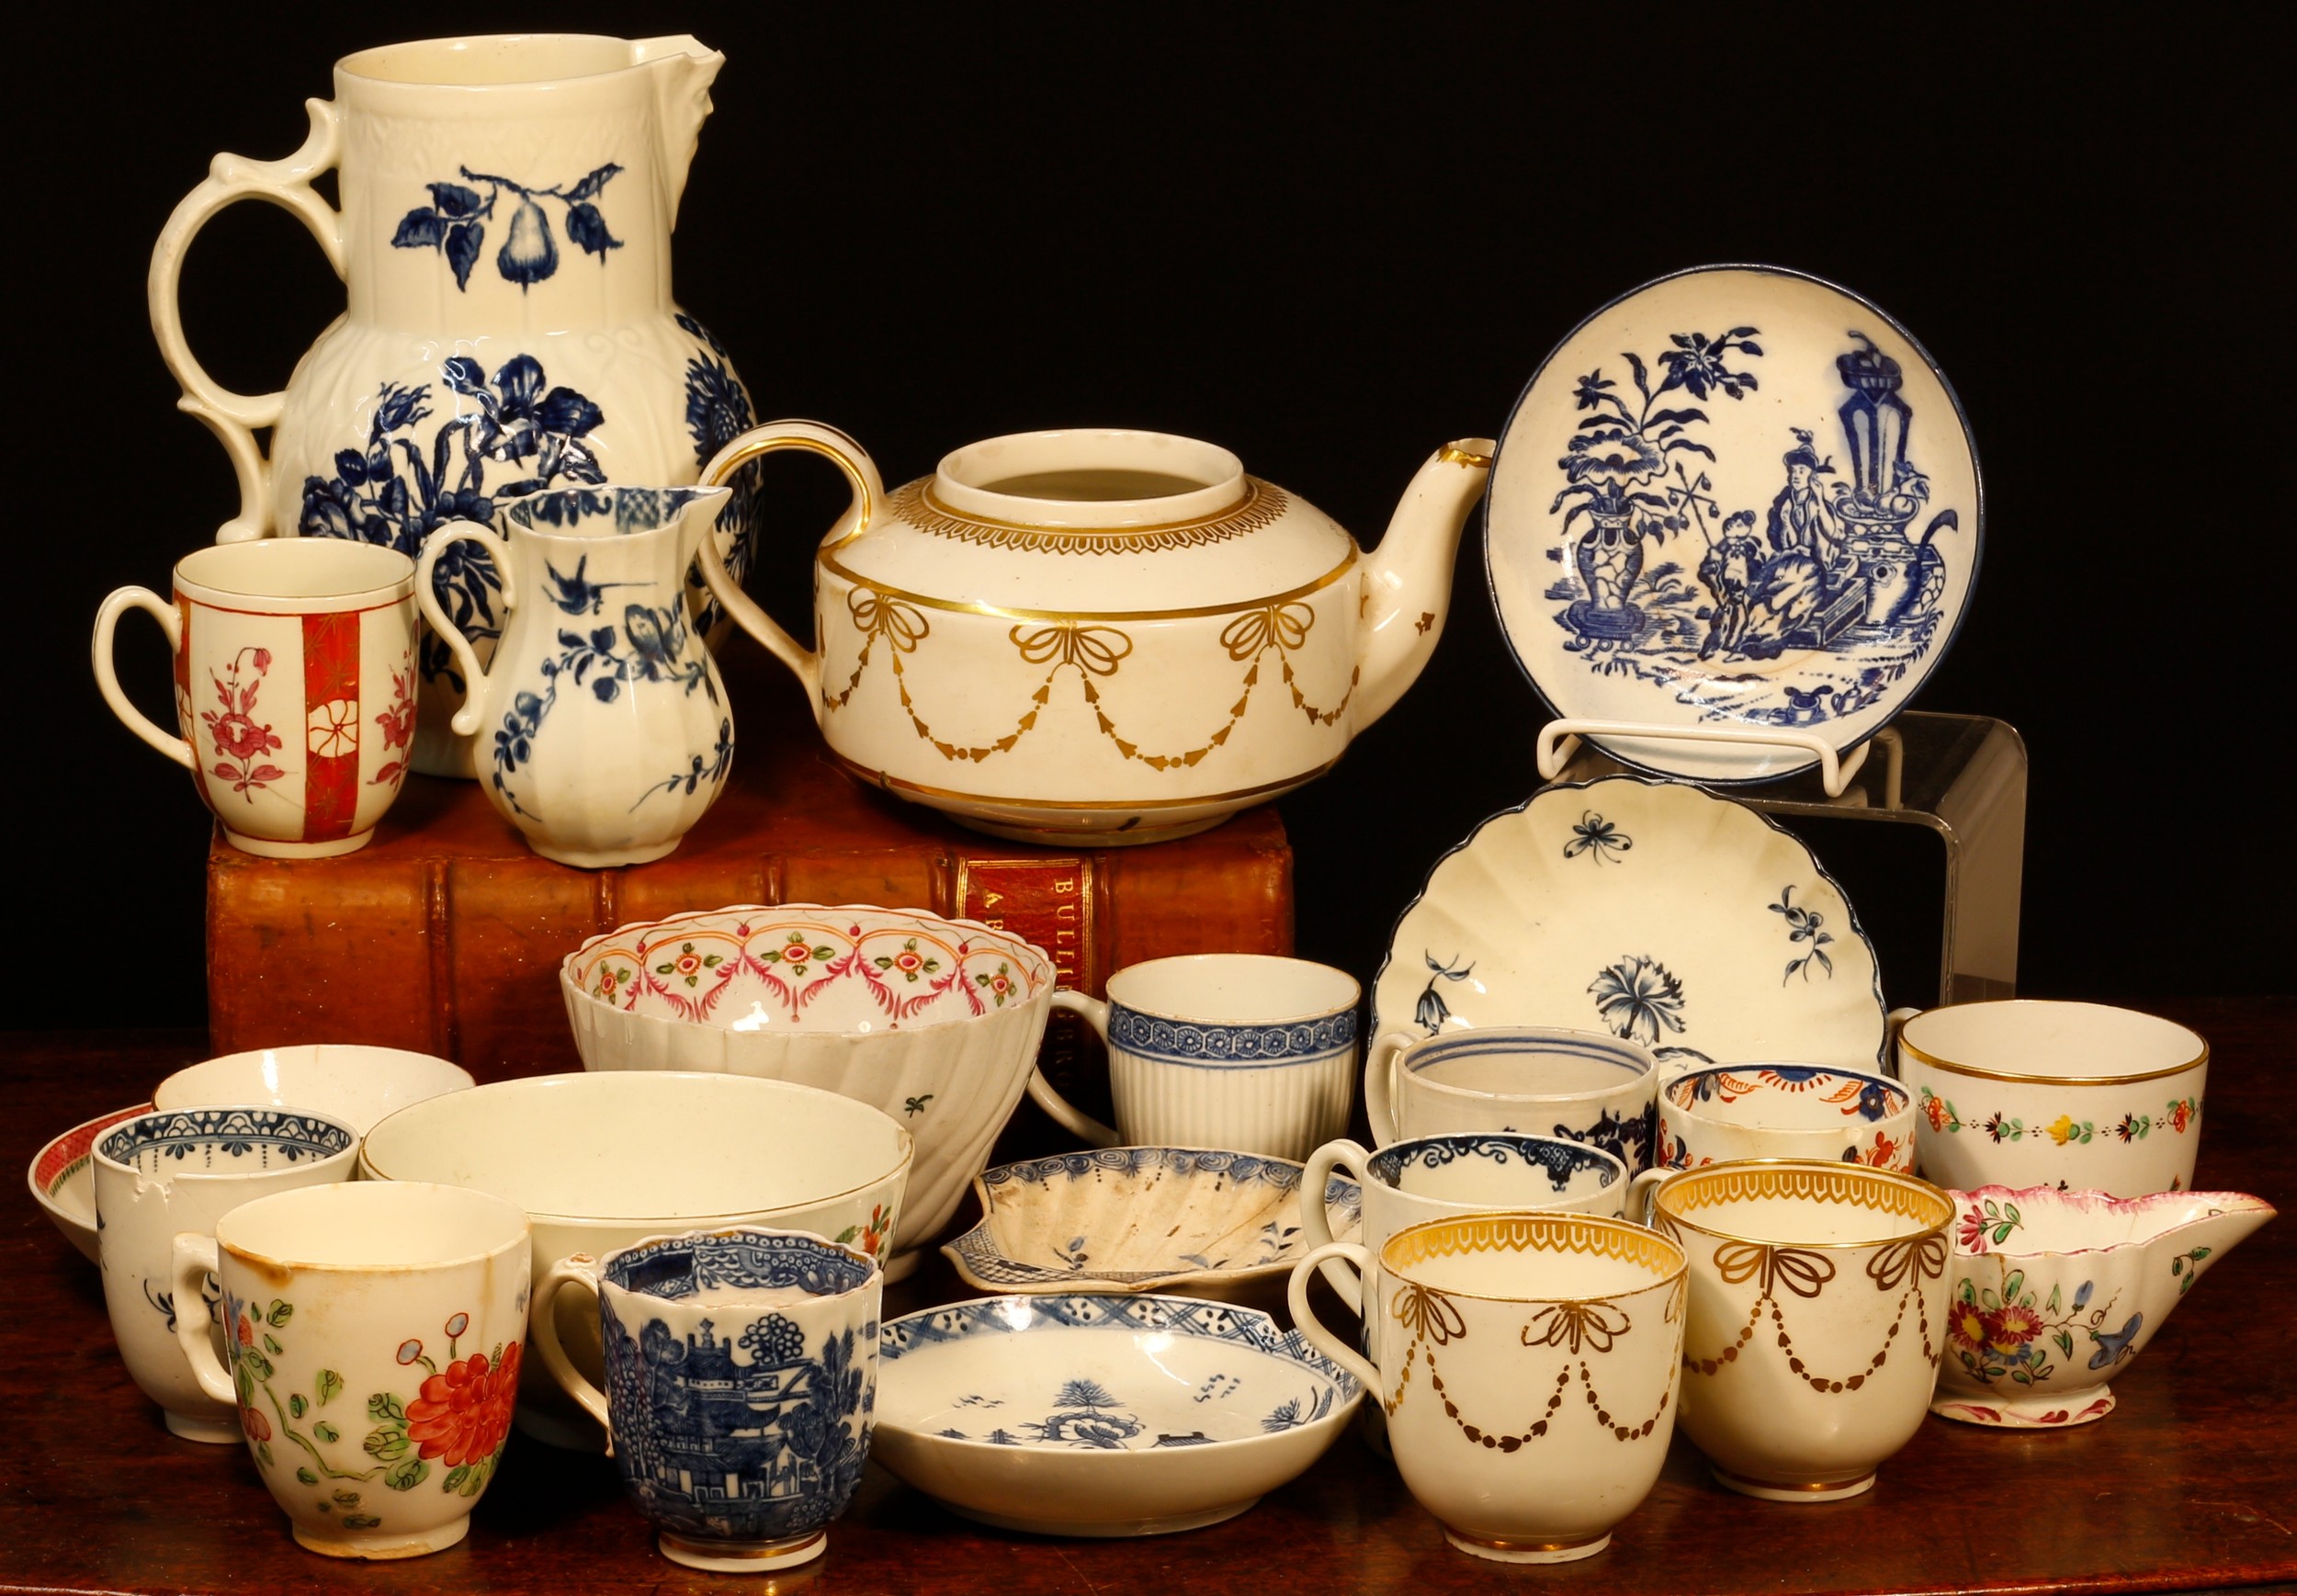 A study collection of 18th century English porcelain, various factories including Worcester, Bow,